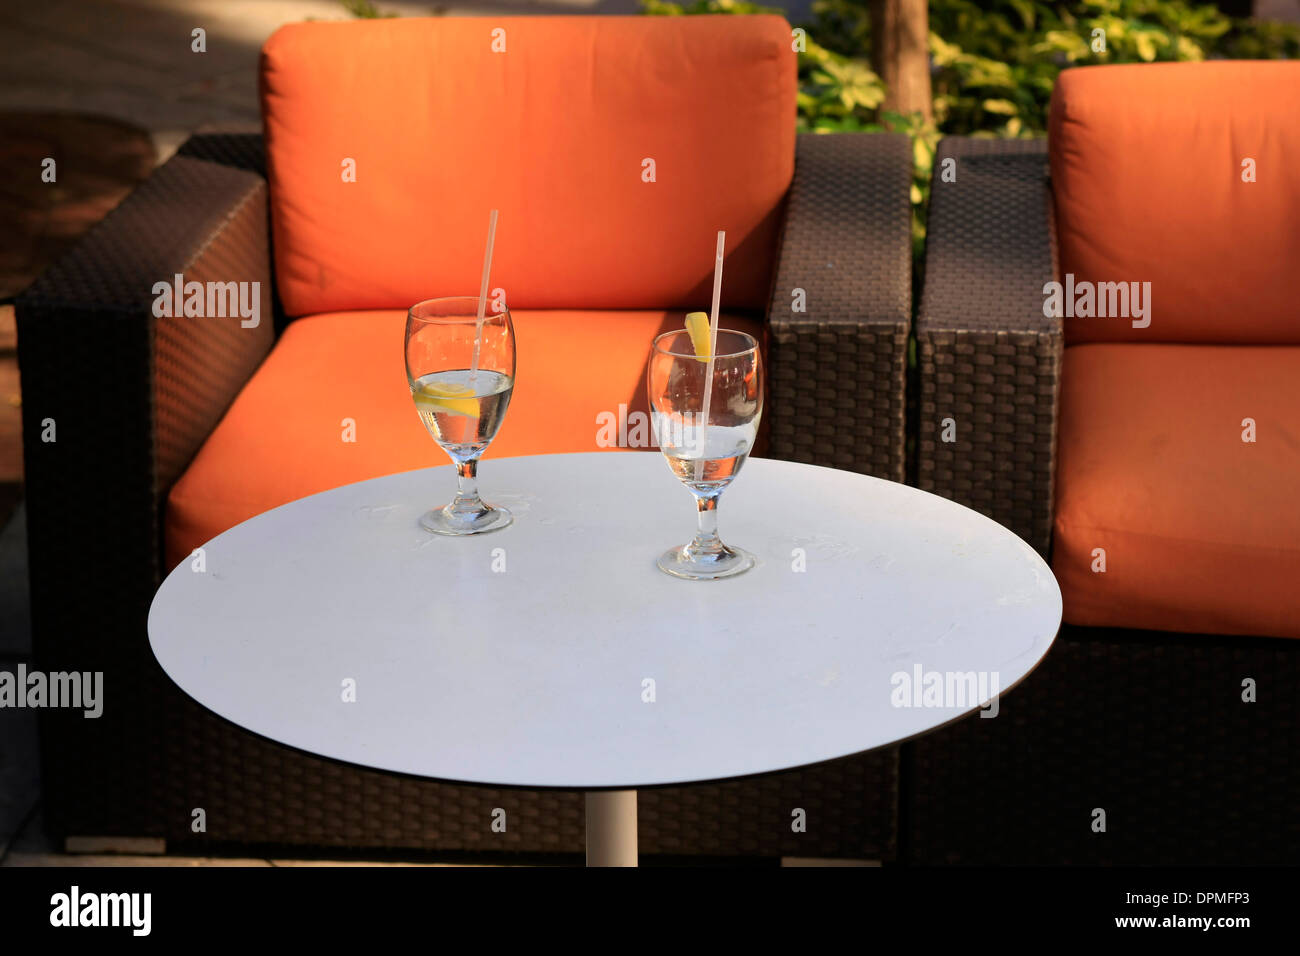 Drinks glasses sitting on a white table with relaxing style chair at an al Fresco restaurant Stock Photo